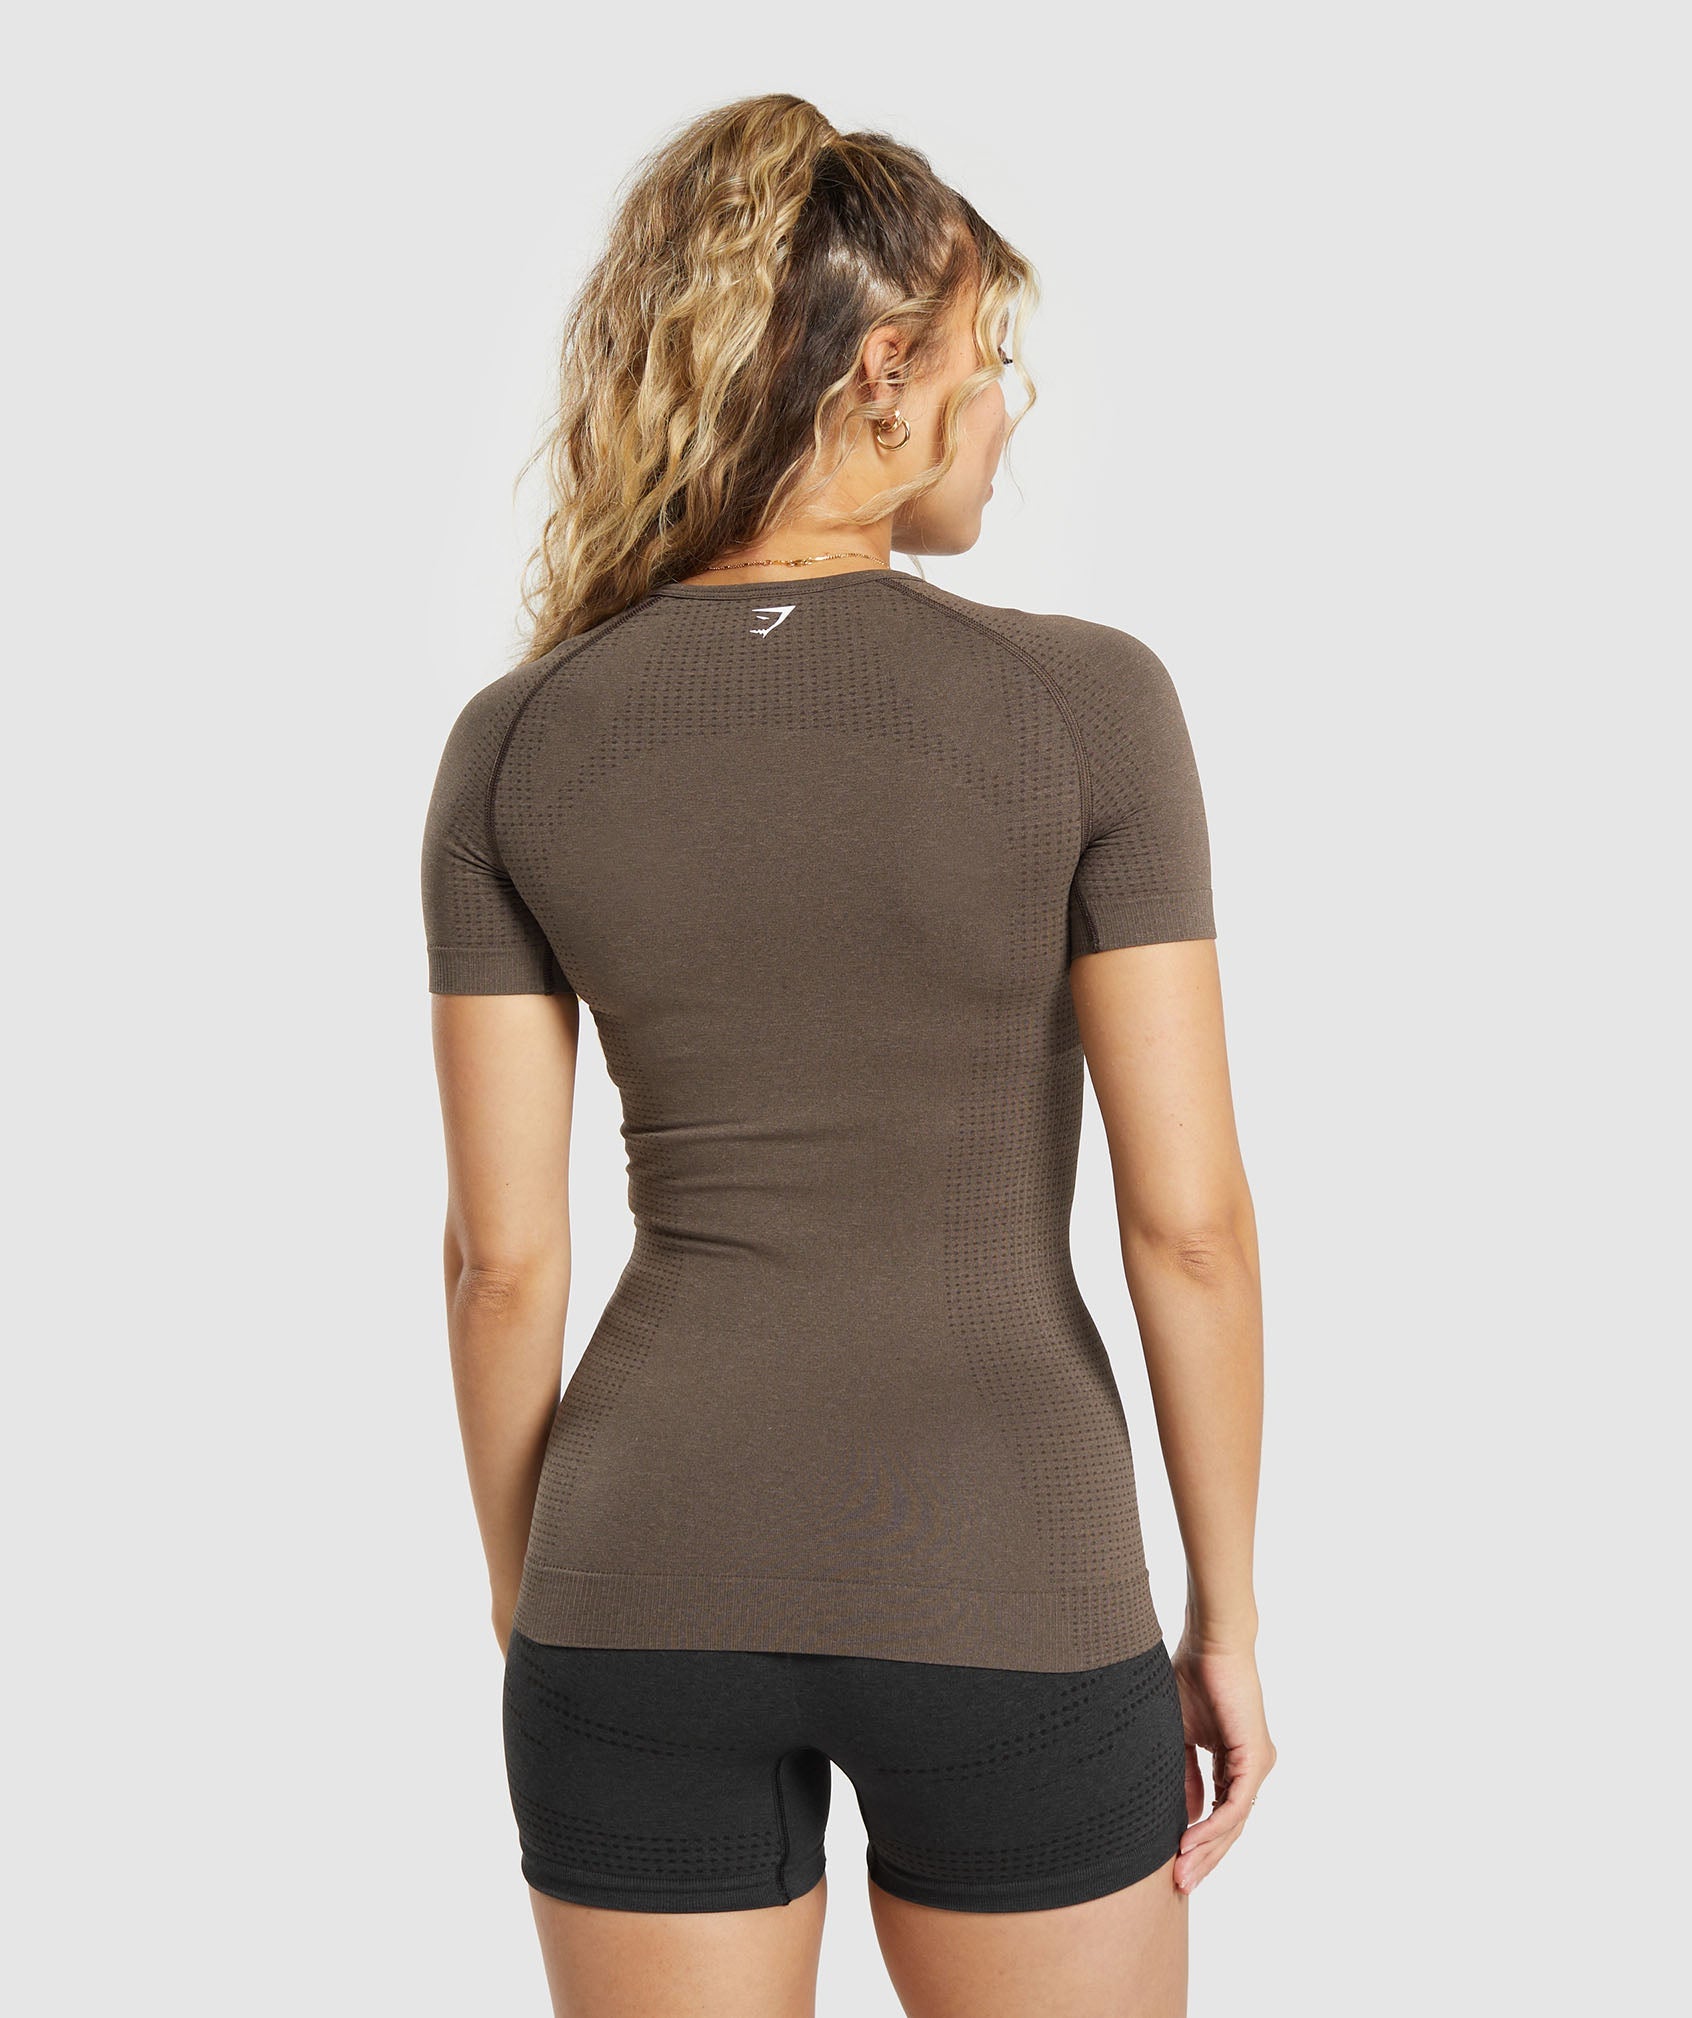 Vital Seamless T-Shirt in Penny Brown Marl - view 2